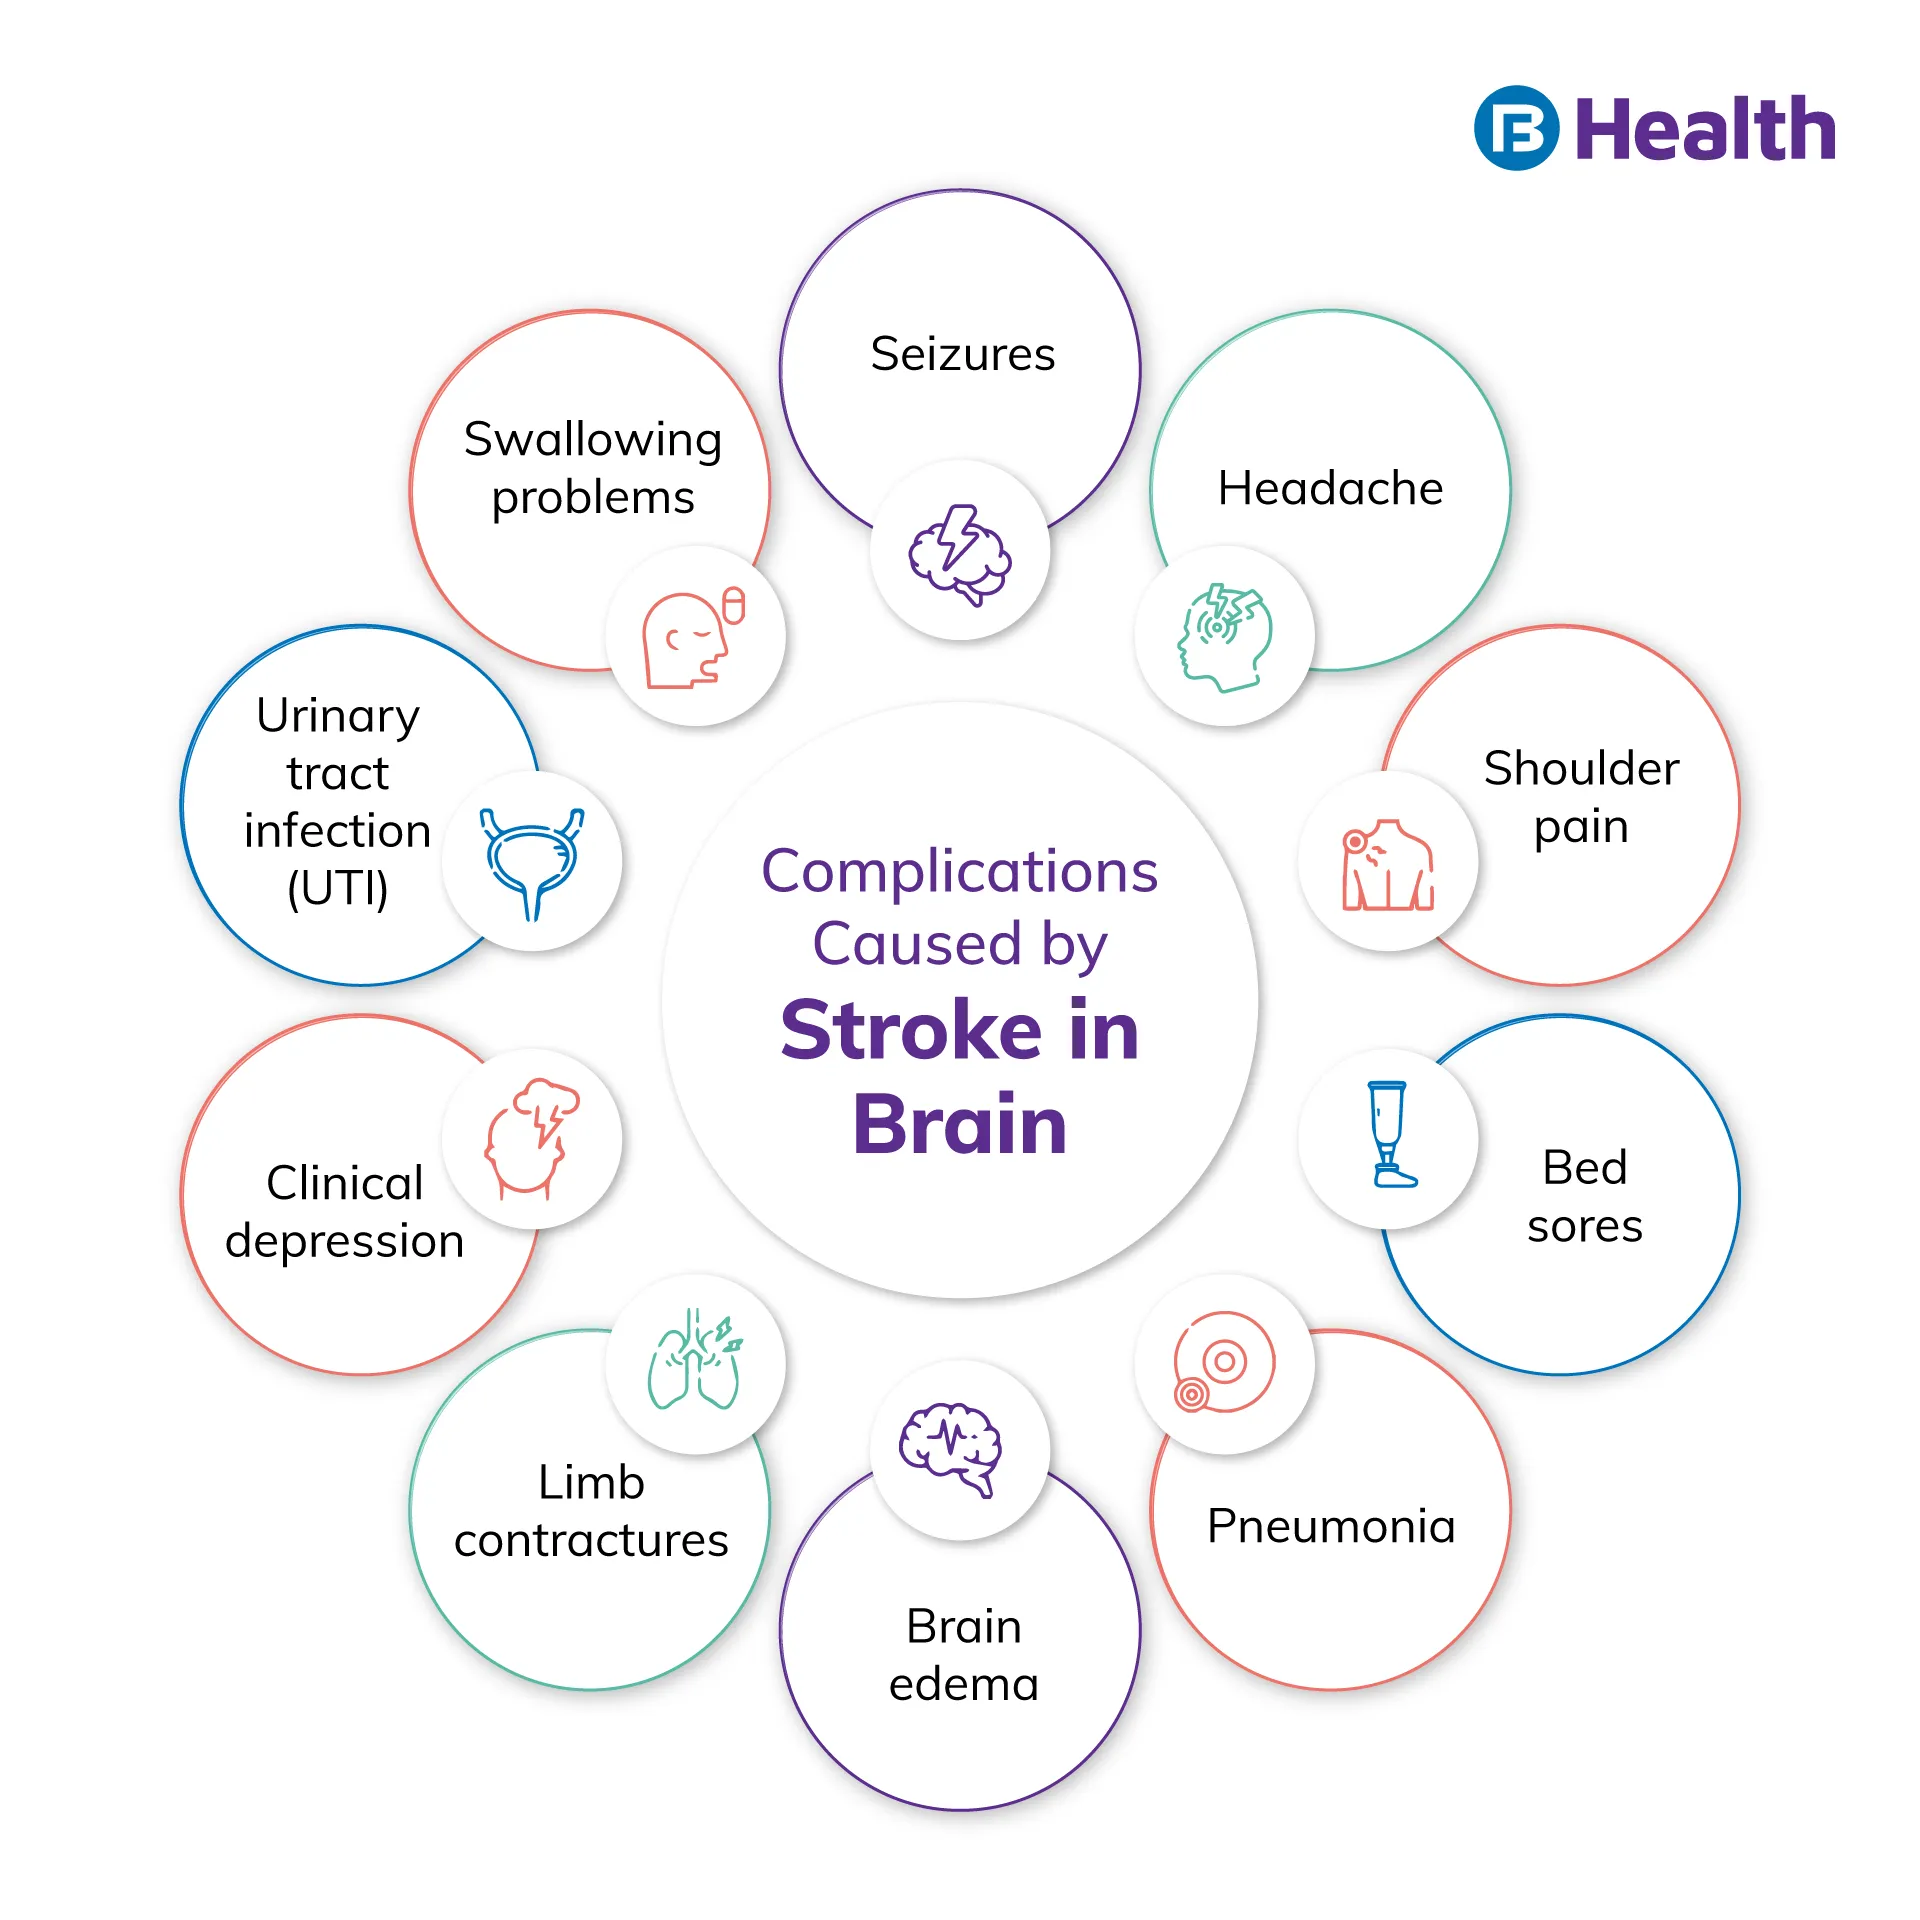 Complications caused by stroke in brain